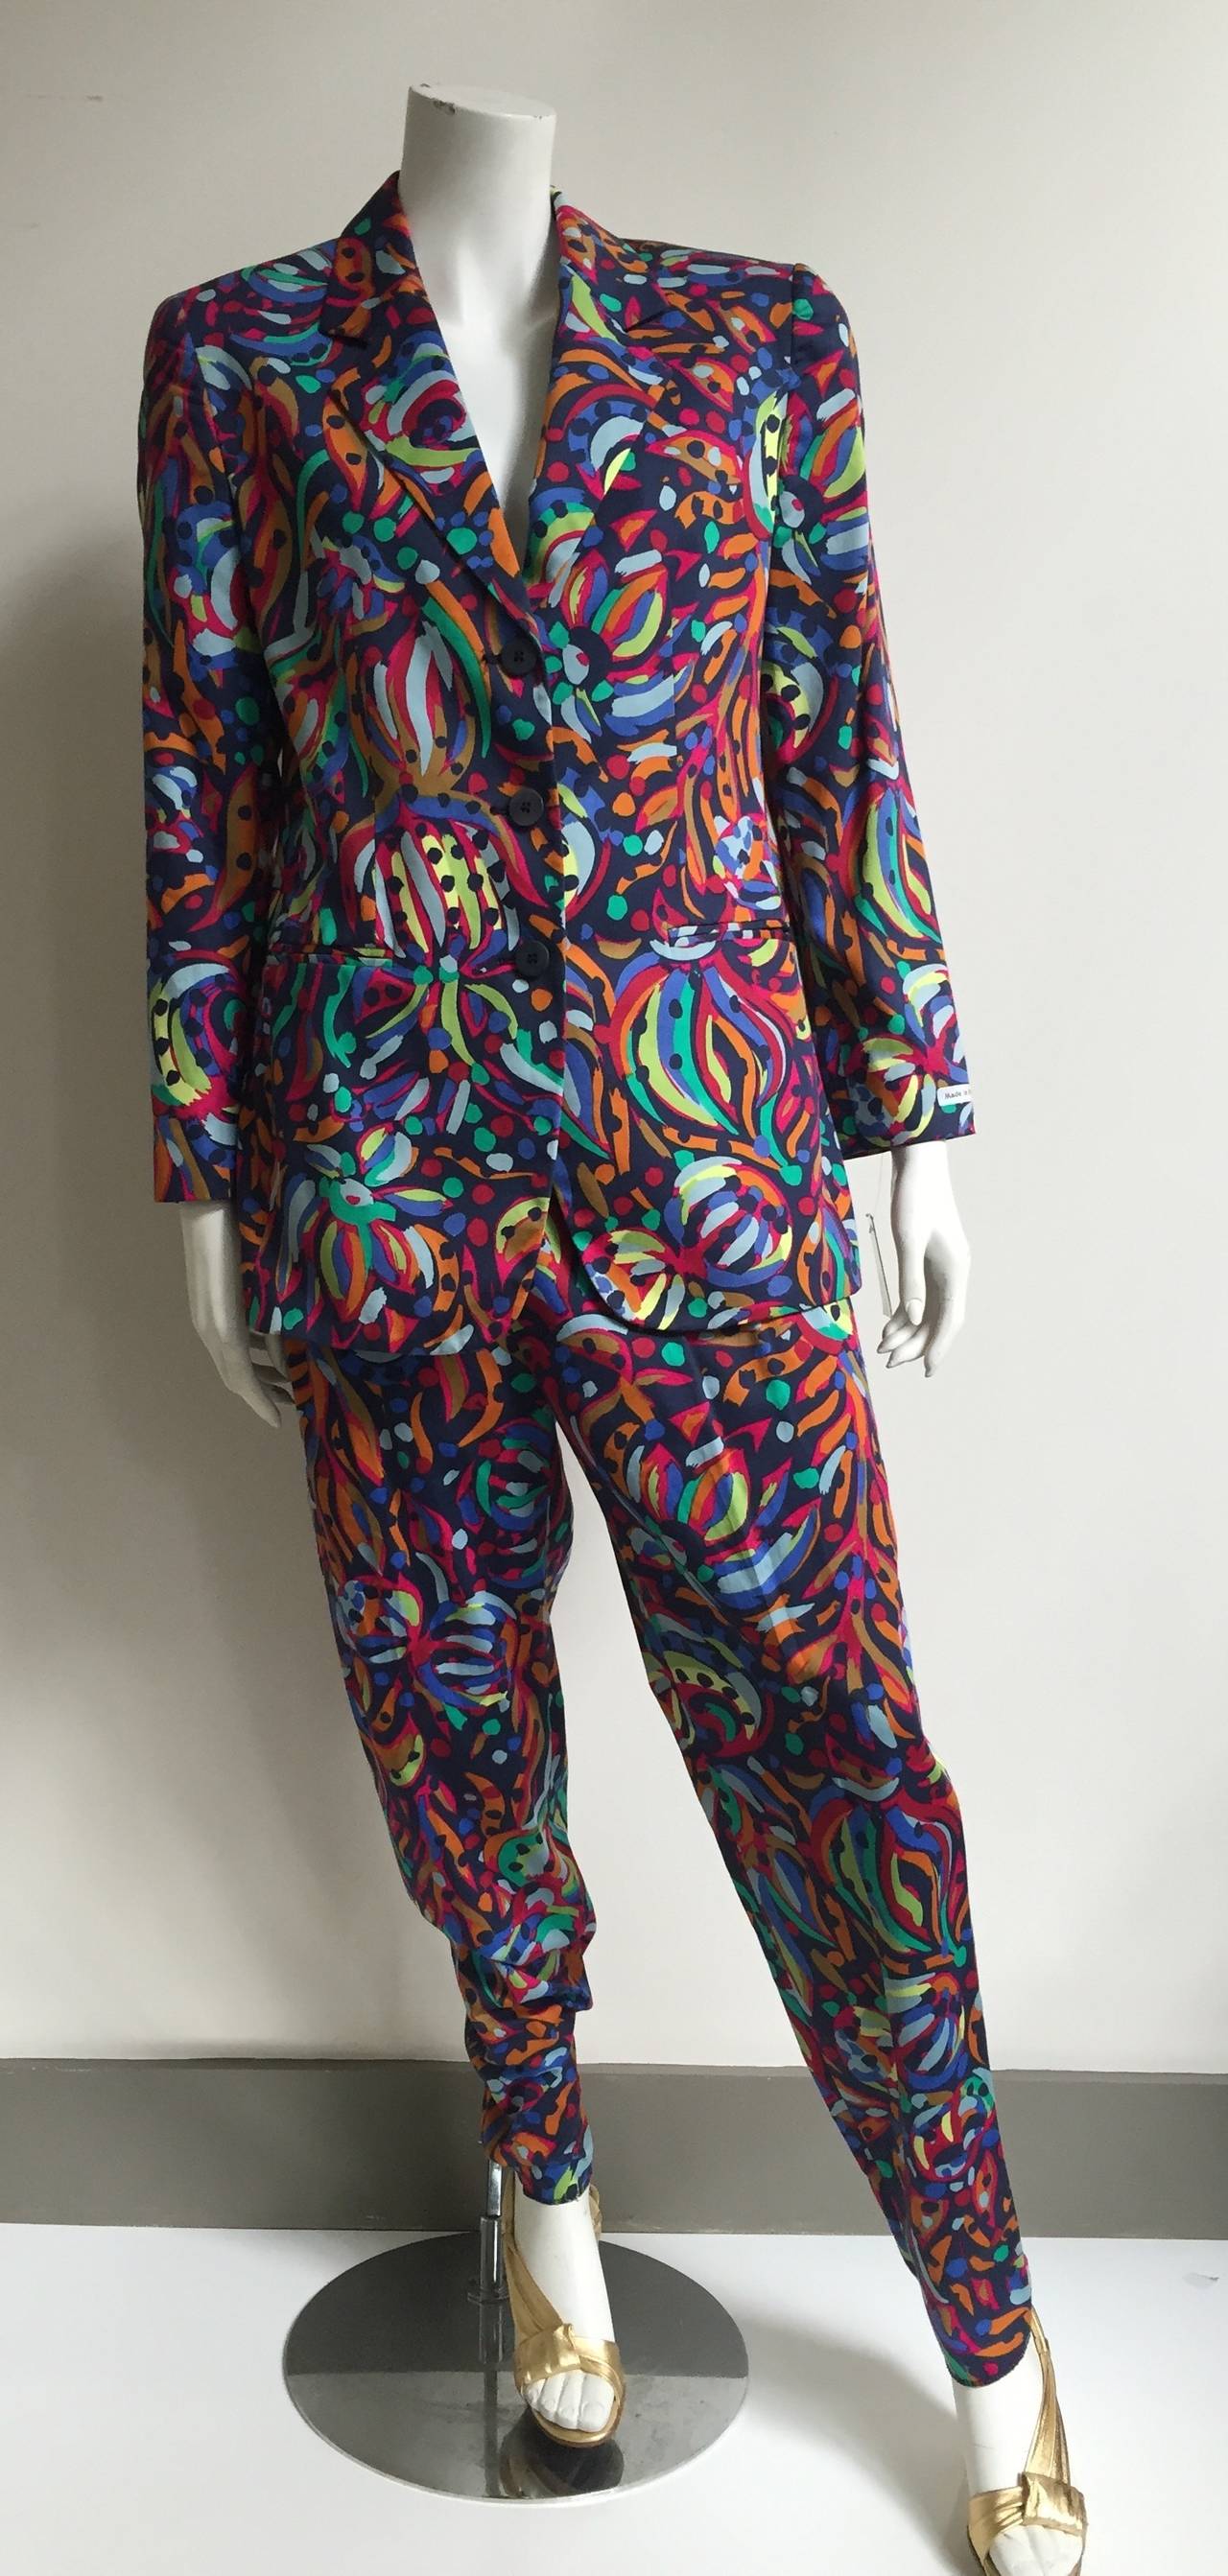 Missoni Donna 80s never worn still with original tags cotton pant suit original size 12 but fits more like a modern size 6/8 (please see measurements).
Made in Italy.
Measurements are:
37